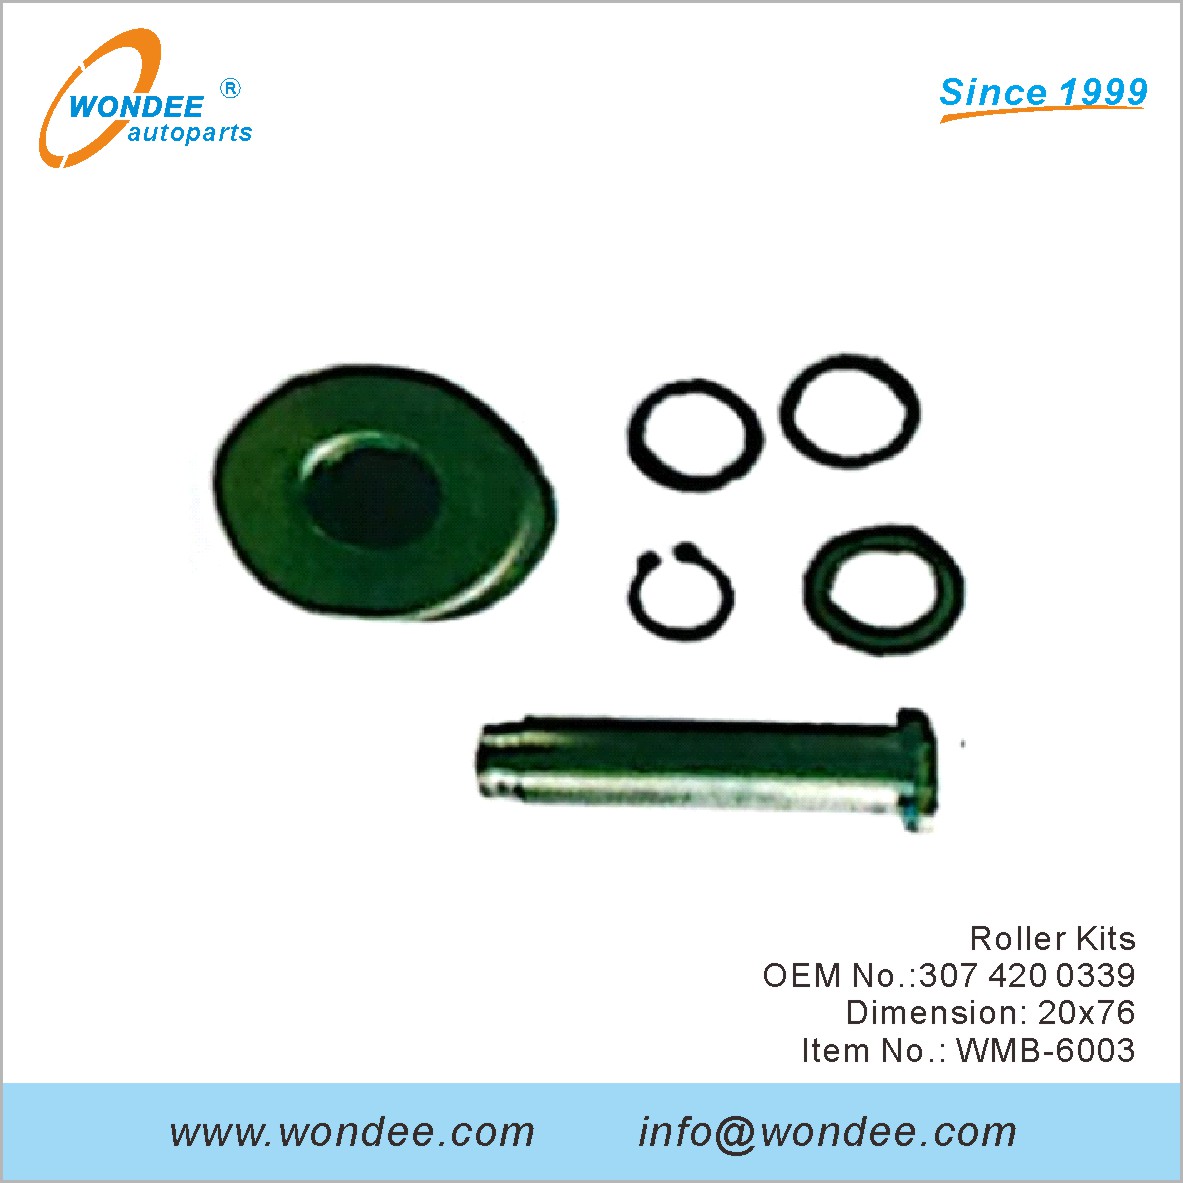 Roller Kits OEM 3074200339 for Benz from WONDEE